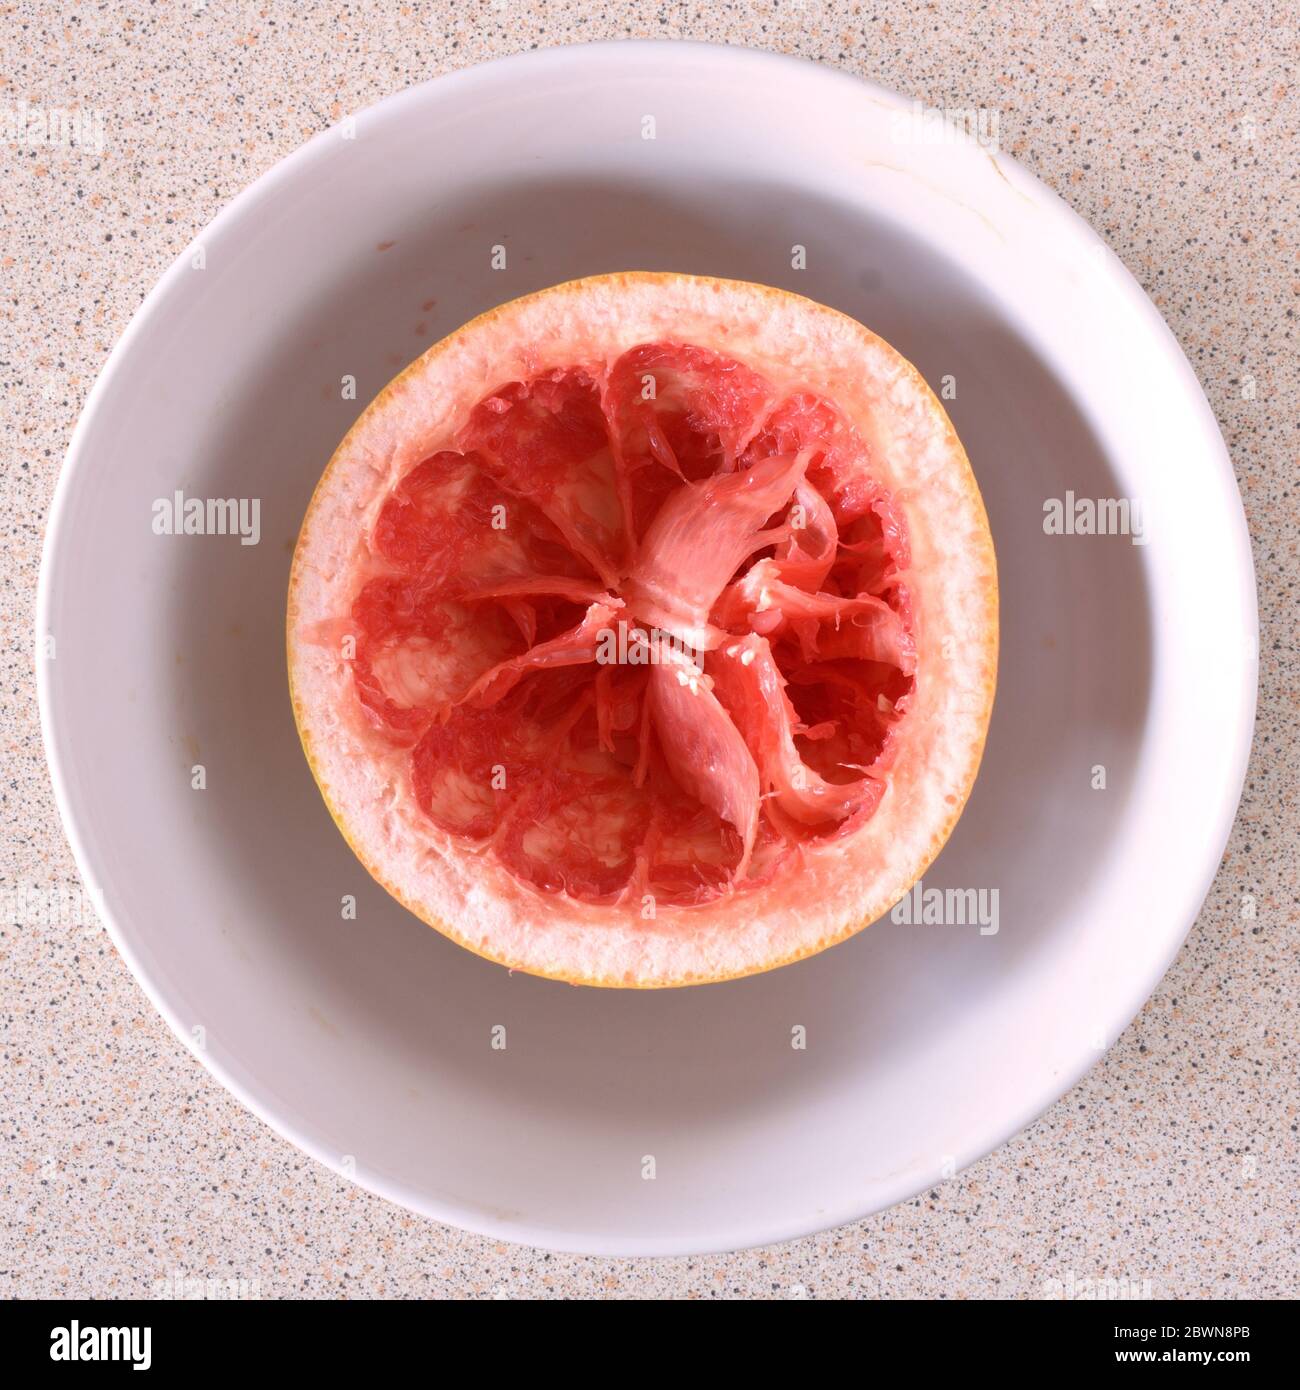 Aerial top down view of and eaten grapefruit in a white bowl on a light background Stock Photo